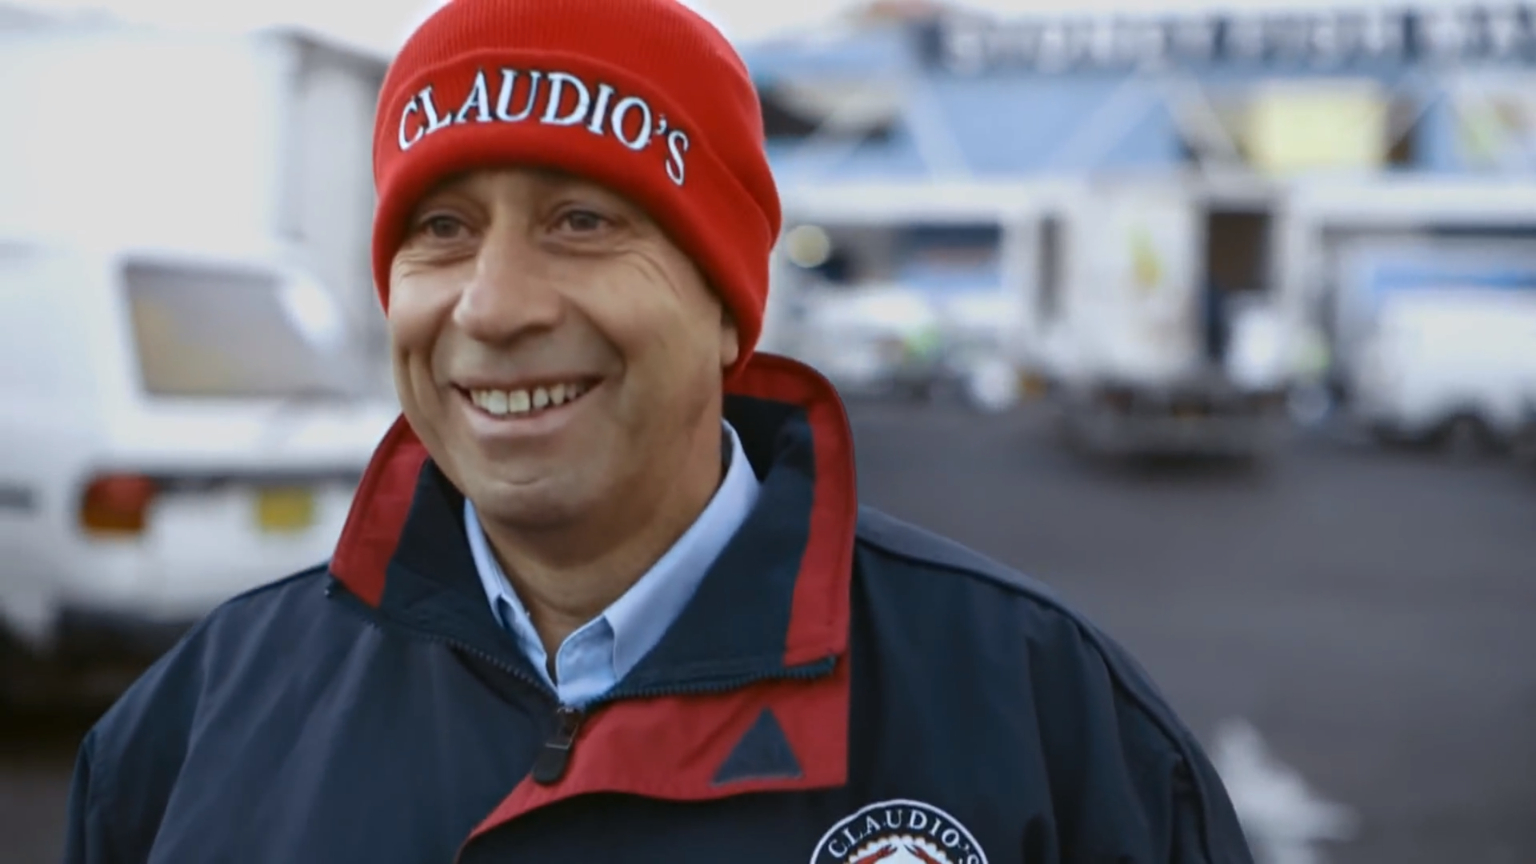 Google My Business Stories: Claudio's Seafoods